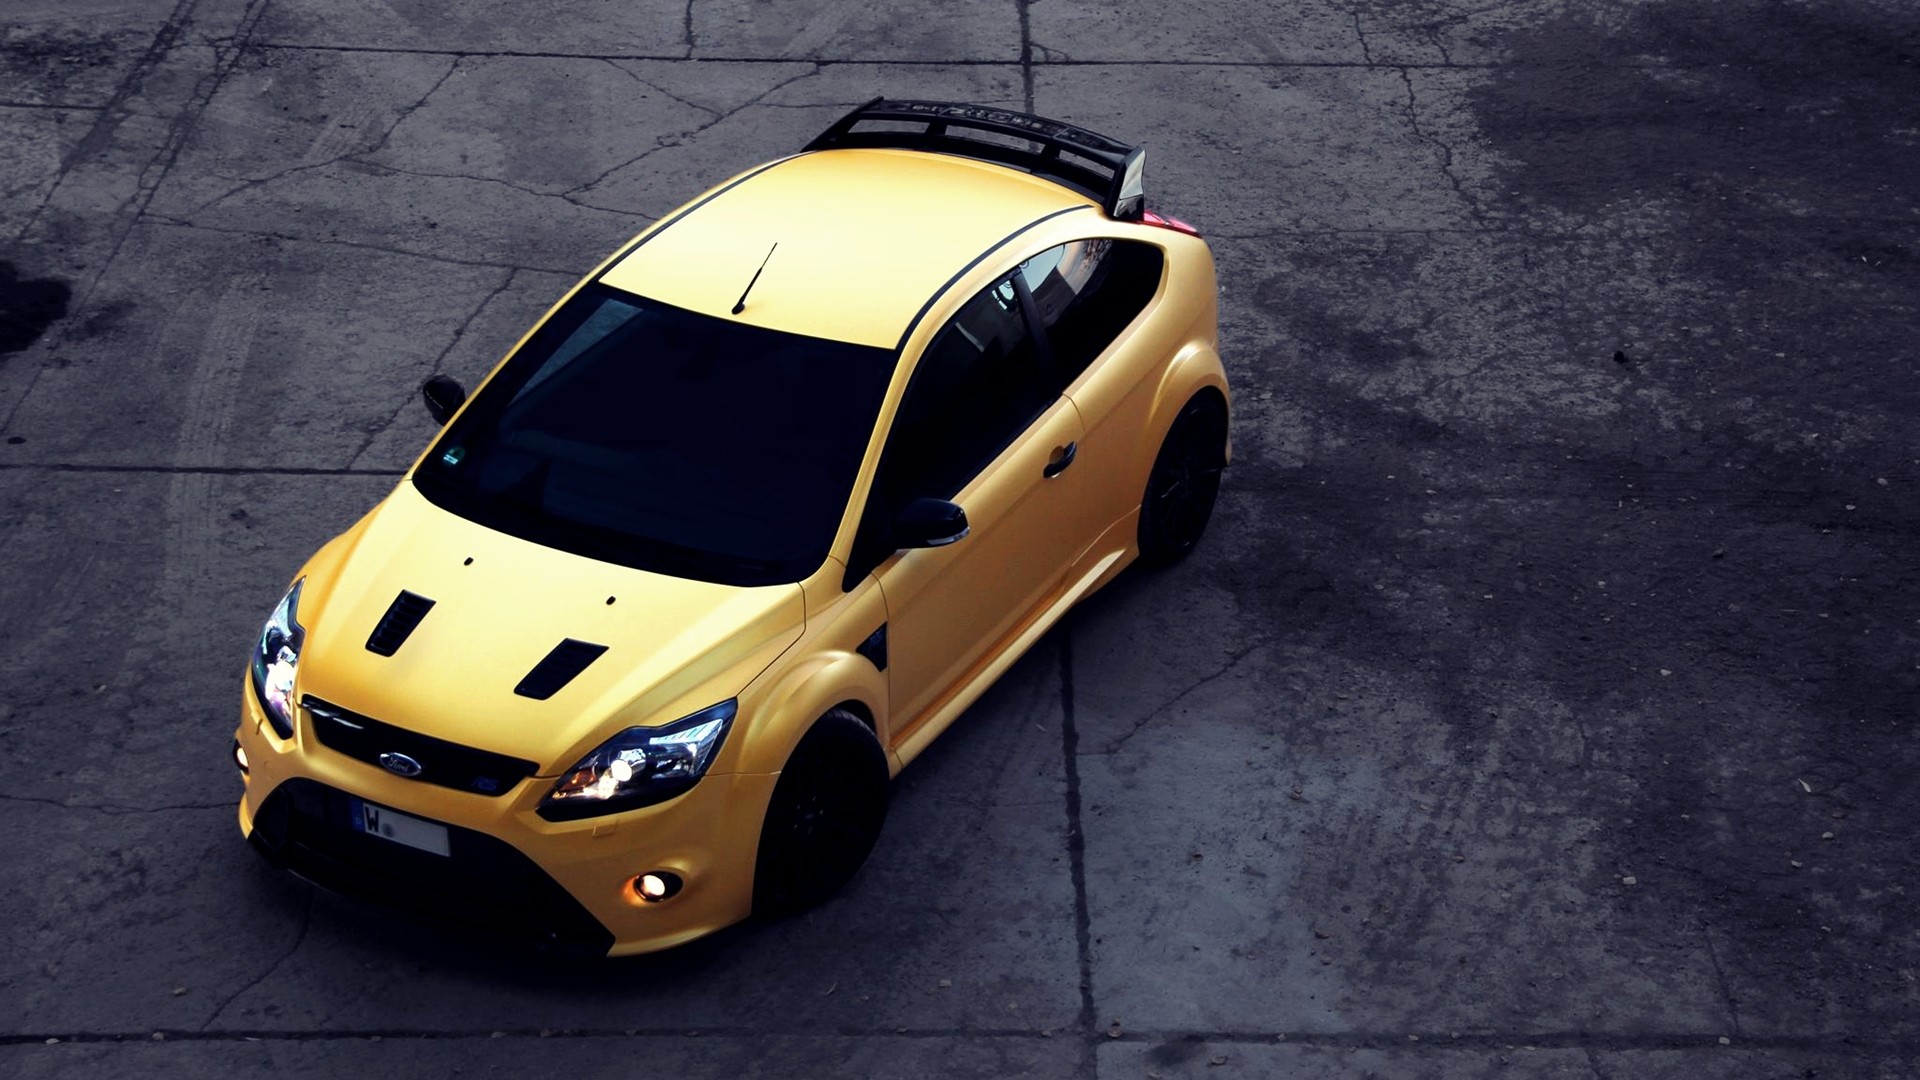 Focus Rs Mk2 wallpaper by Rafter240502  Download on ZEDGE  1f1f